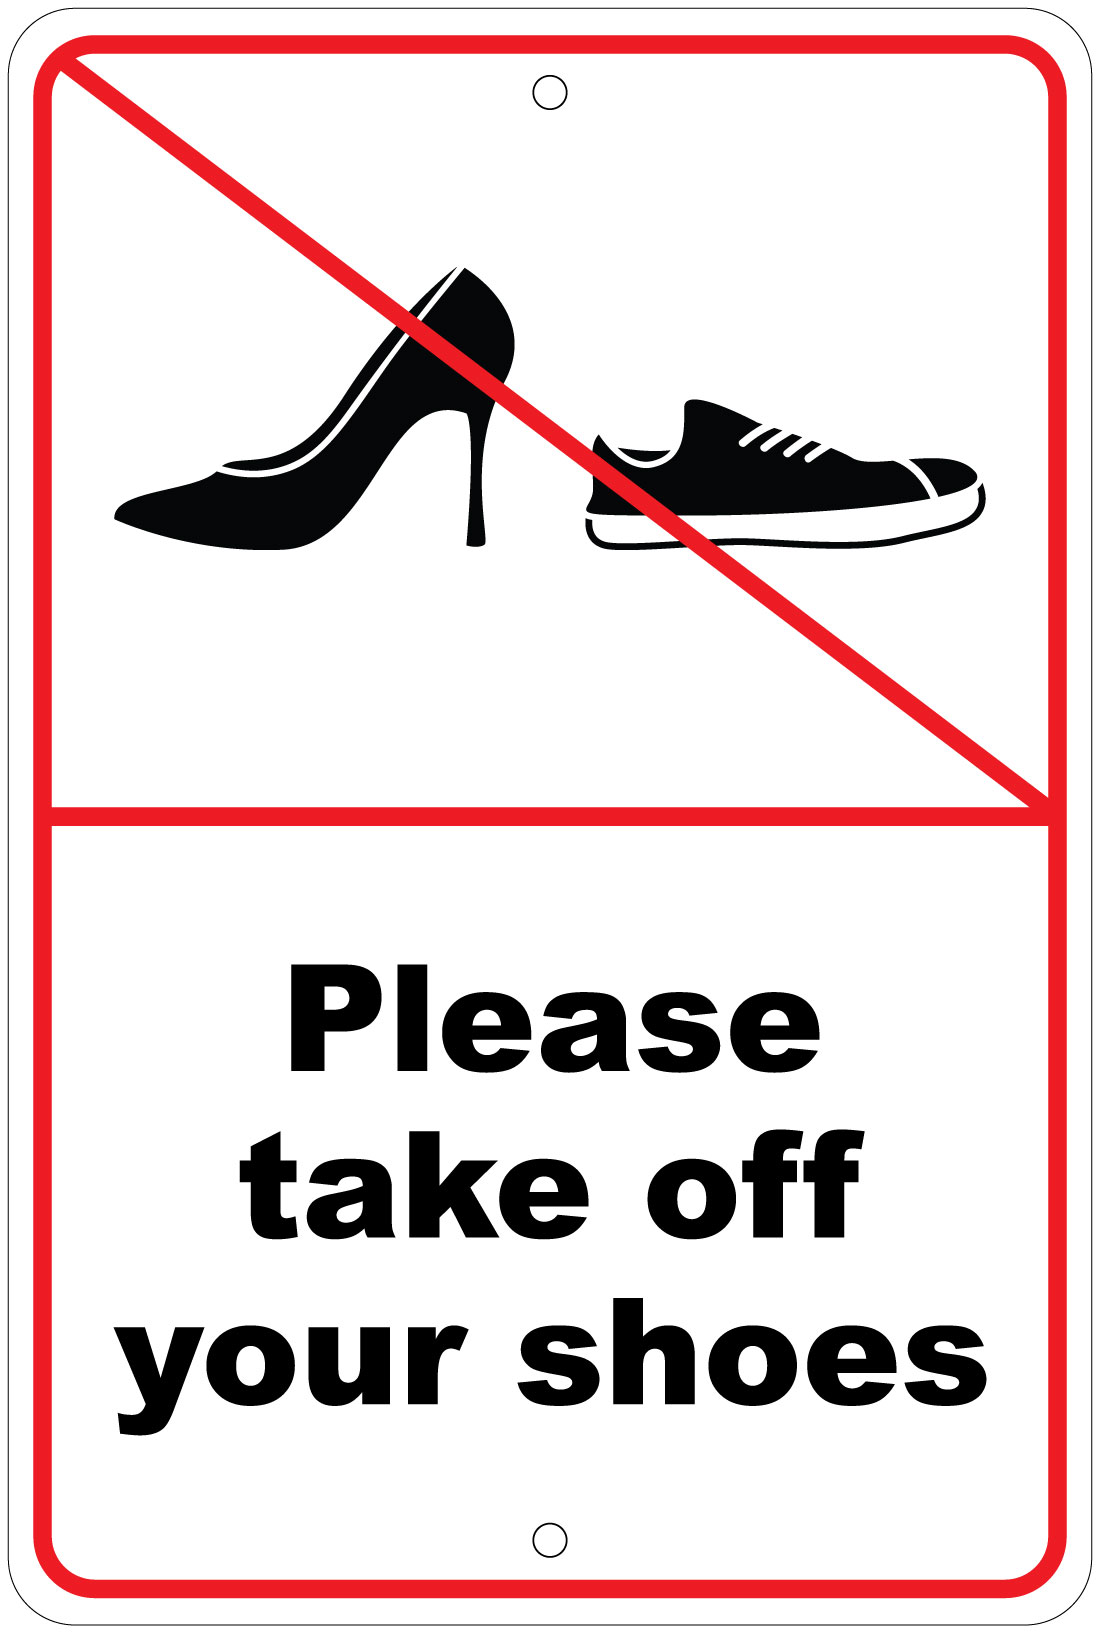 Please Take Off Your Shoes Notice 8"x12" Aluminum Sign | eBay